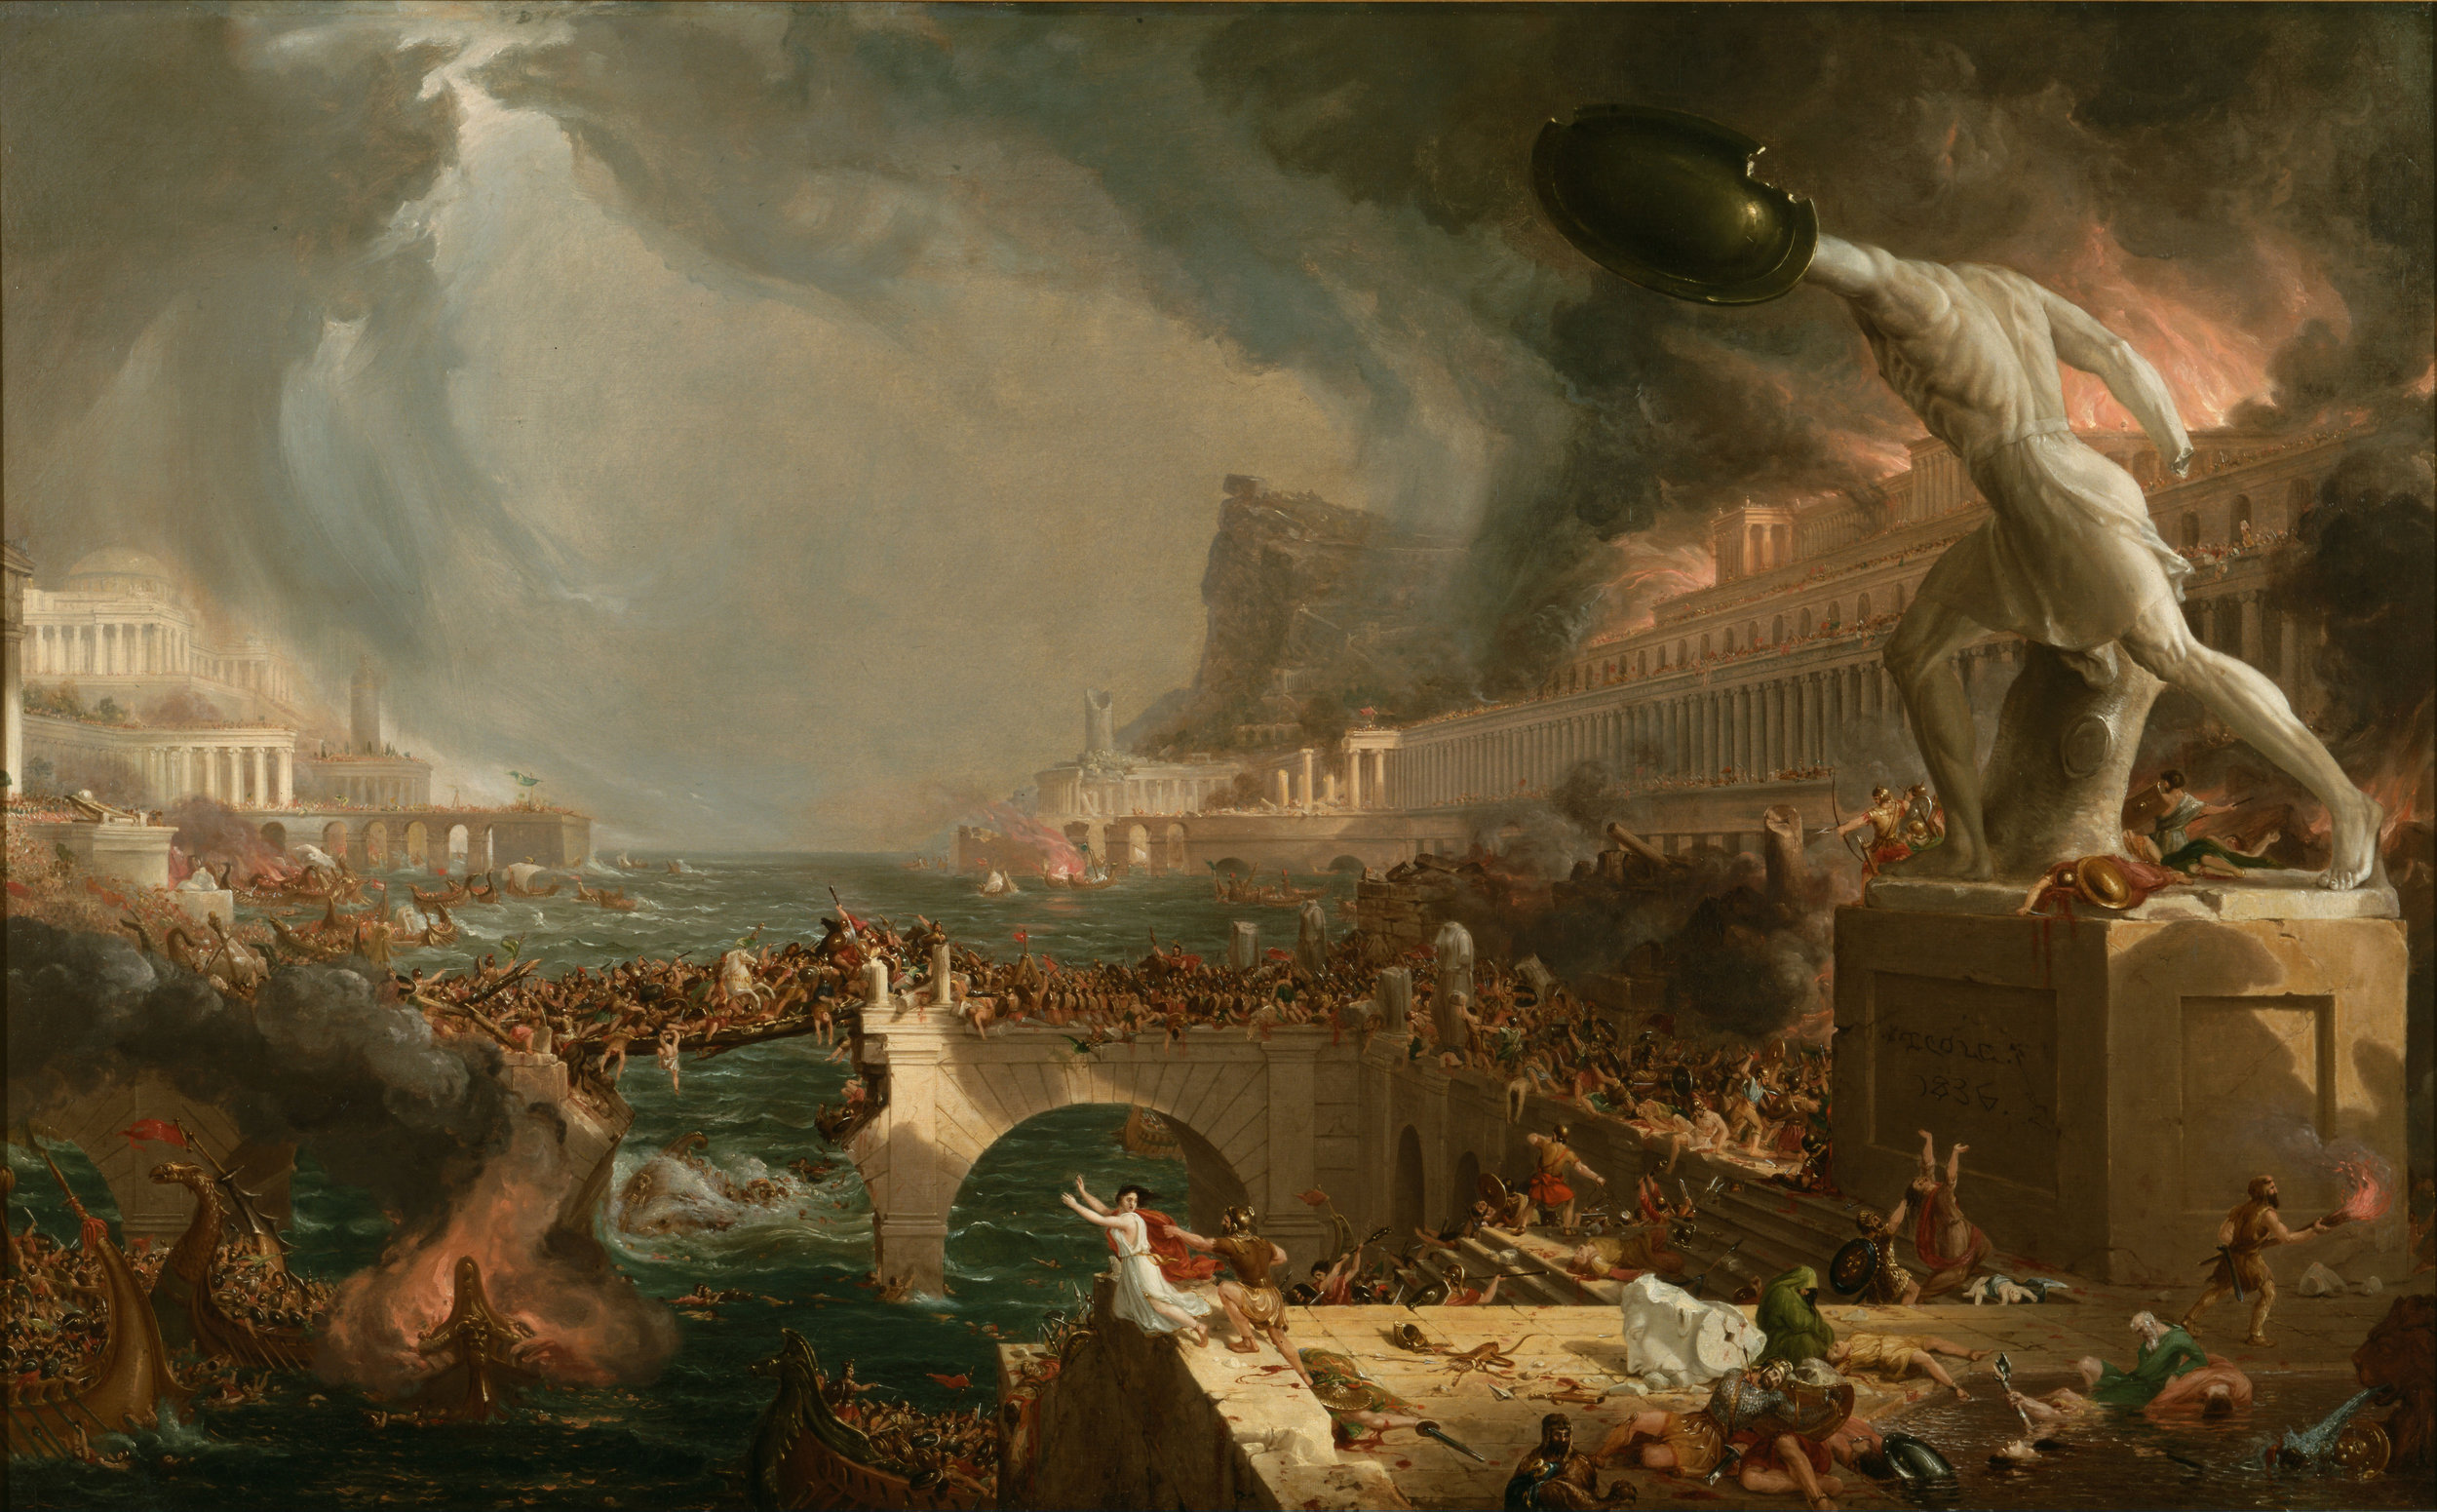 Destruction – Thomas Cole 1836By Exlore Thomas Cole, Public Domain, https://commons.wikimedia.org/w/index.php?curid=183045